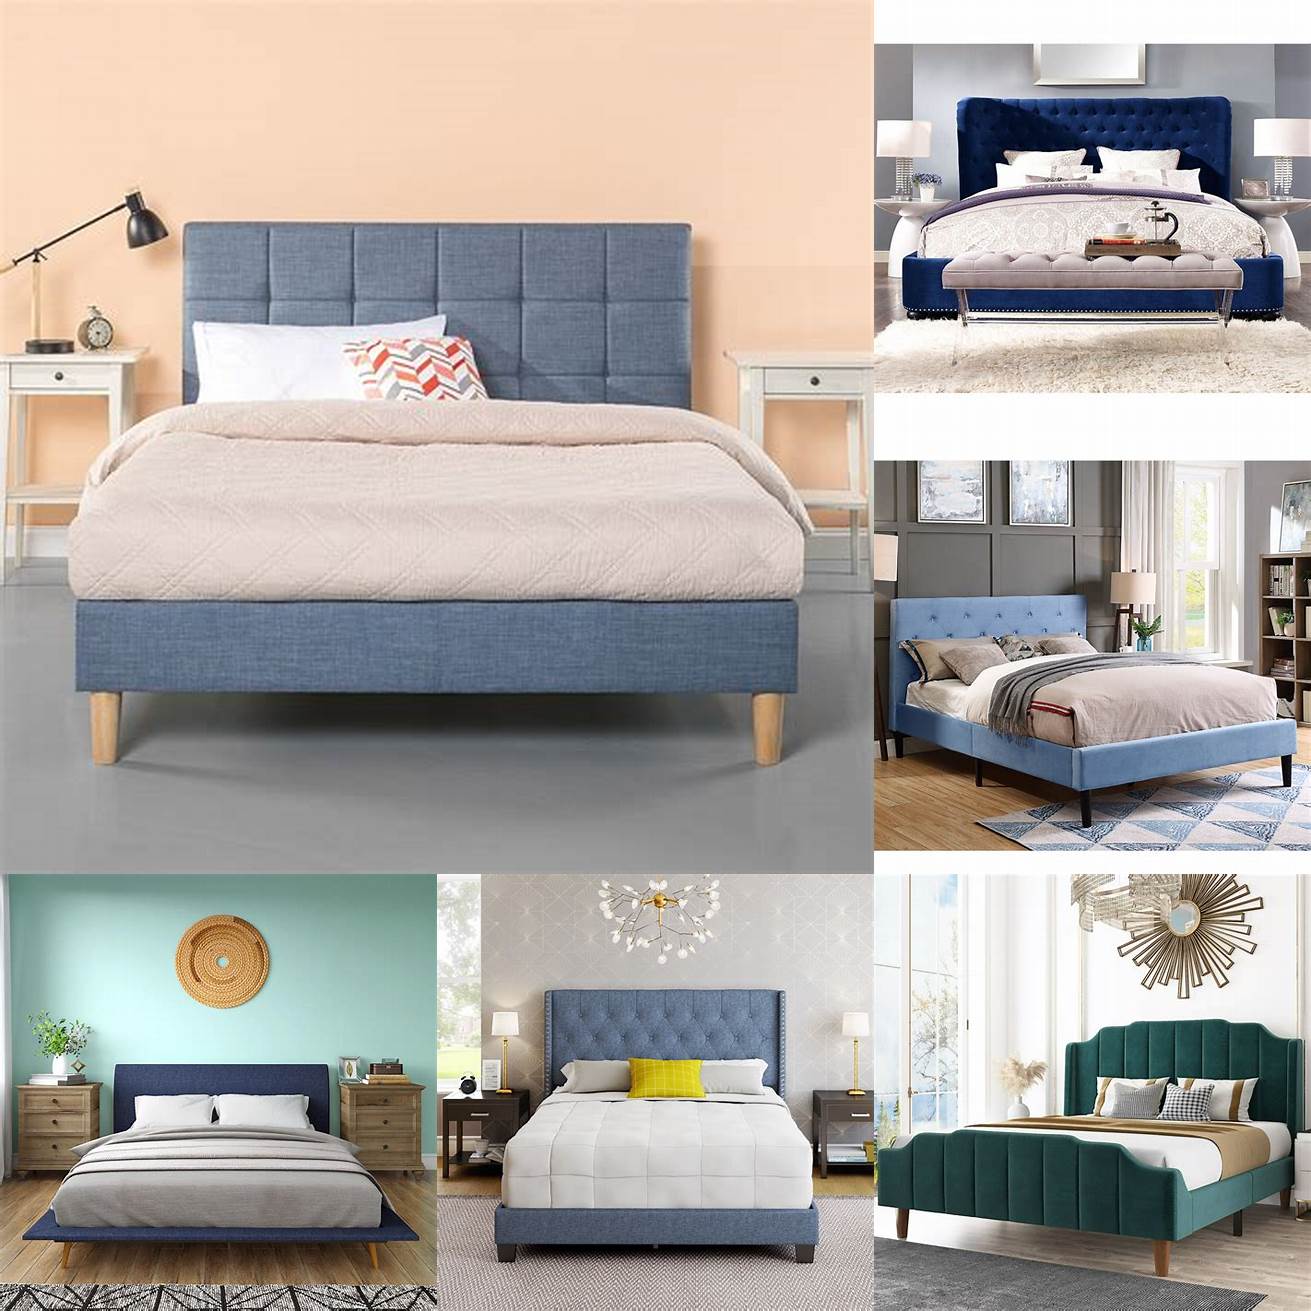 The Upholstered Platform Bed Queen in a colorful bedroom